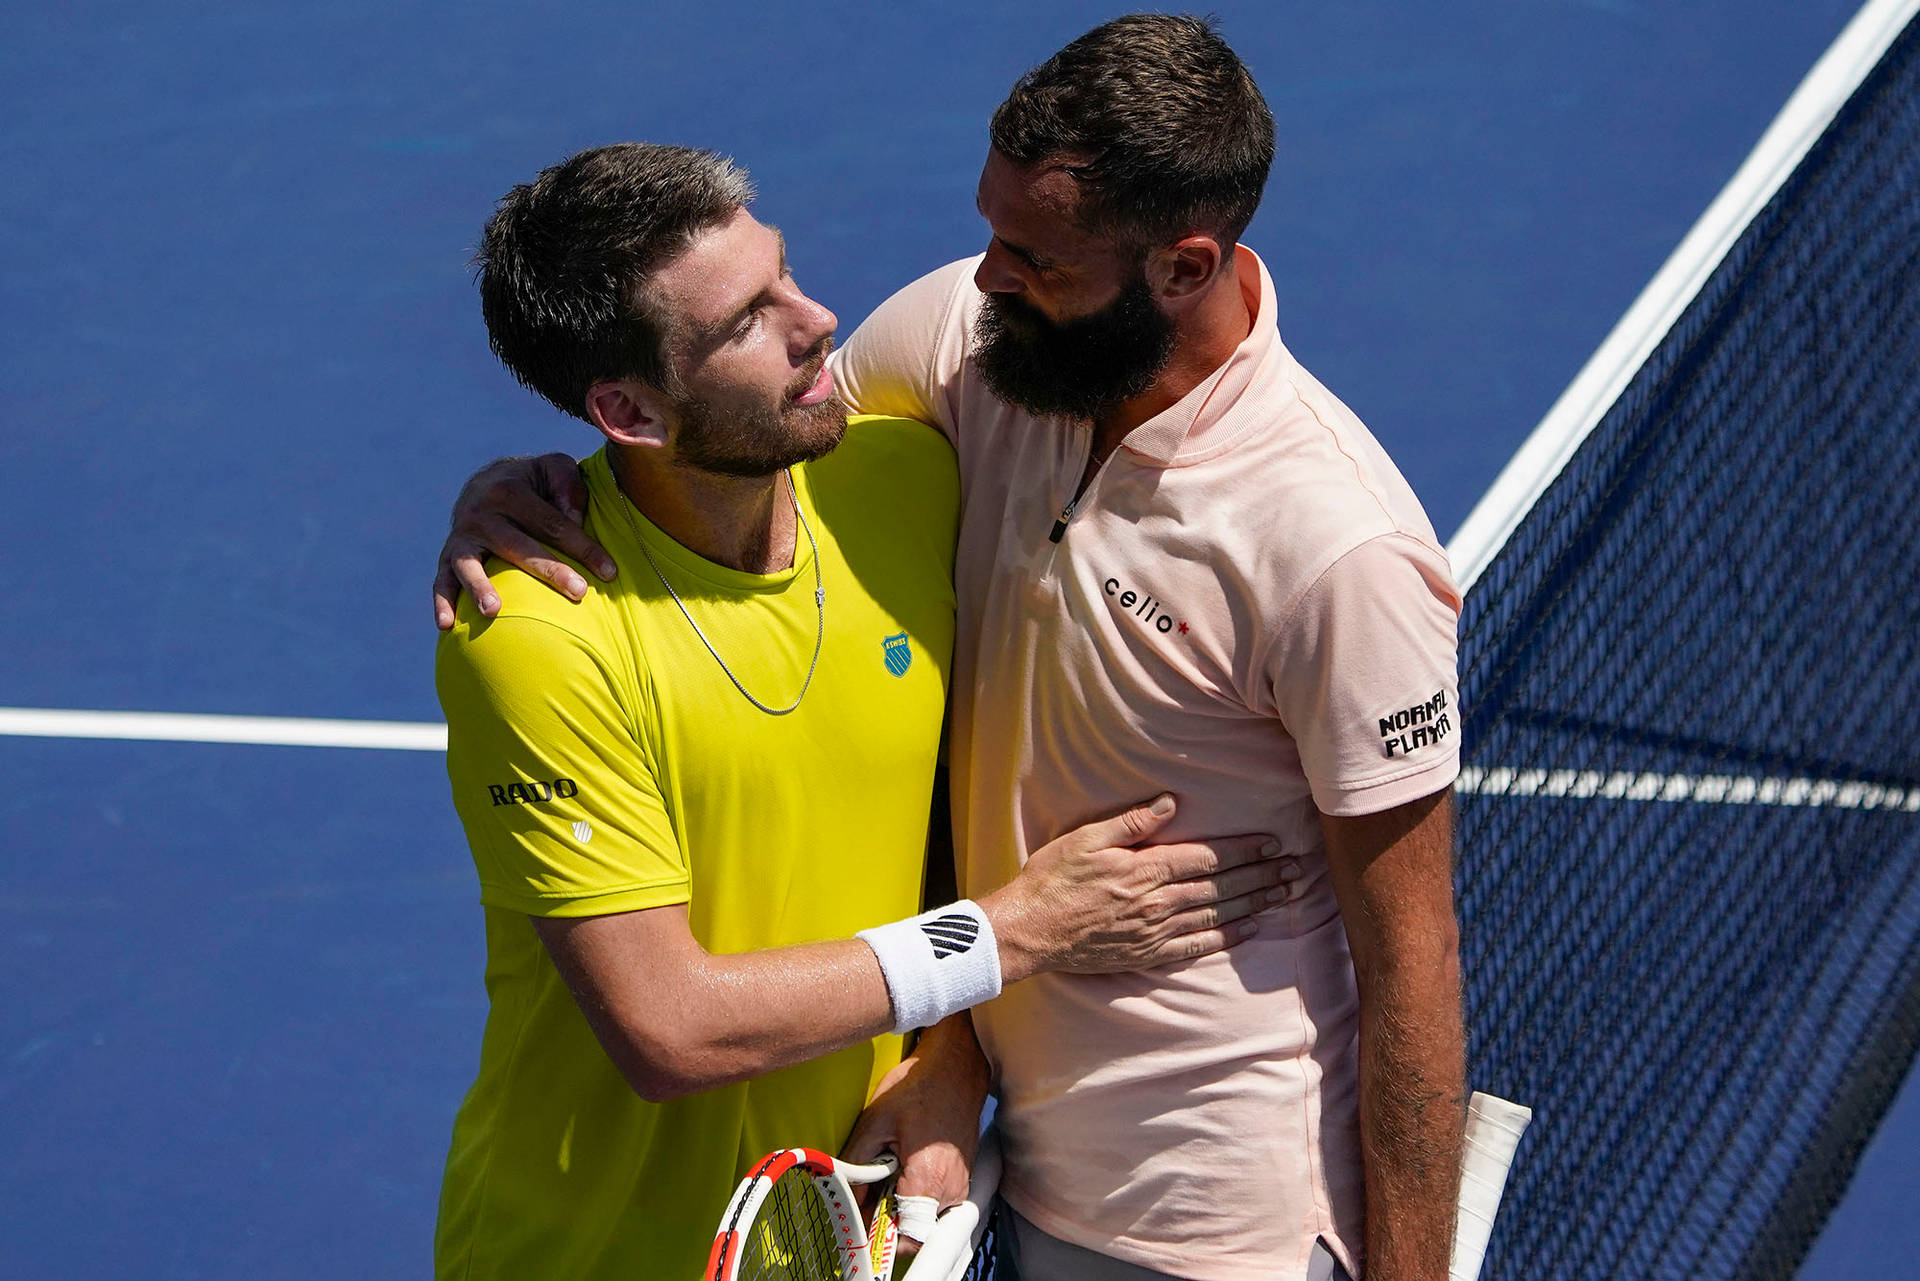 Benoit Paire and Cameron Norrie sharing an embrace after a tennis match. Wallpaper